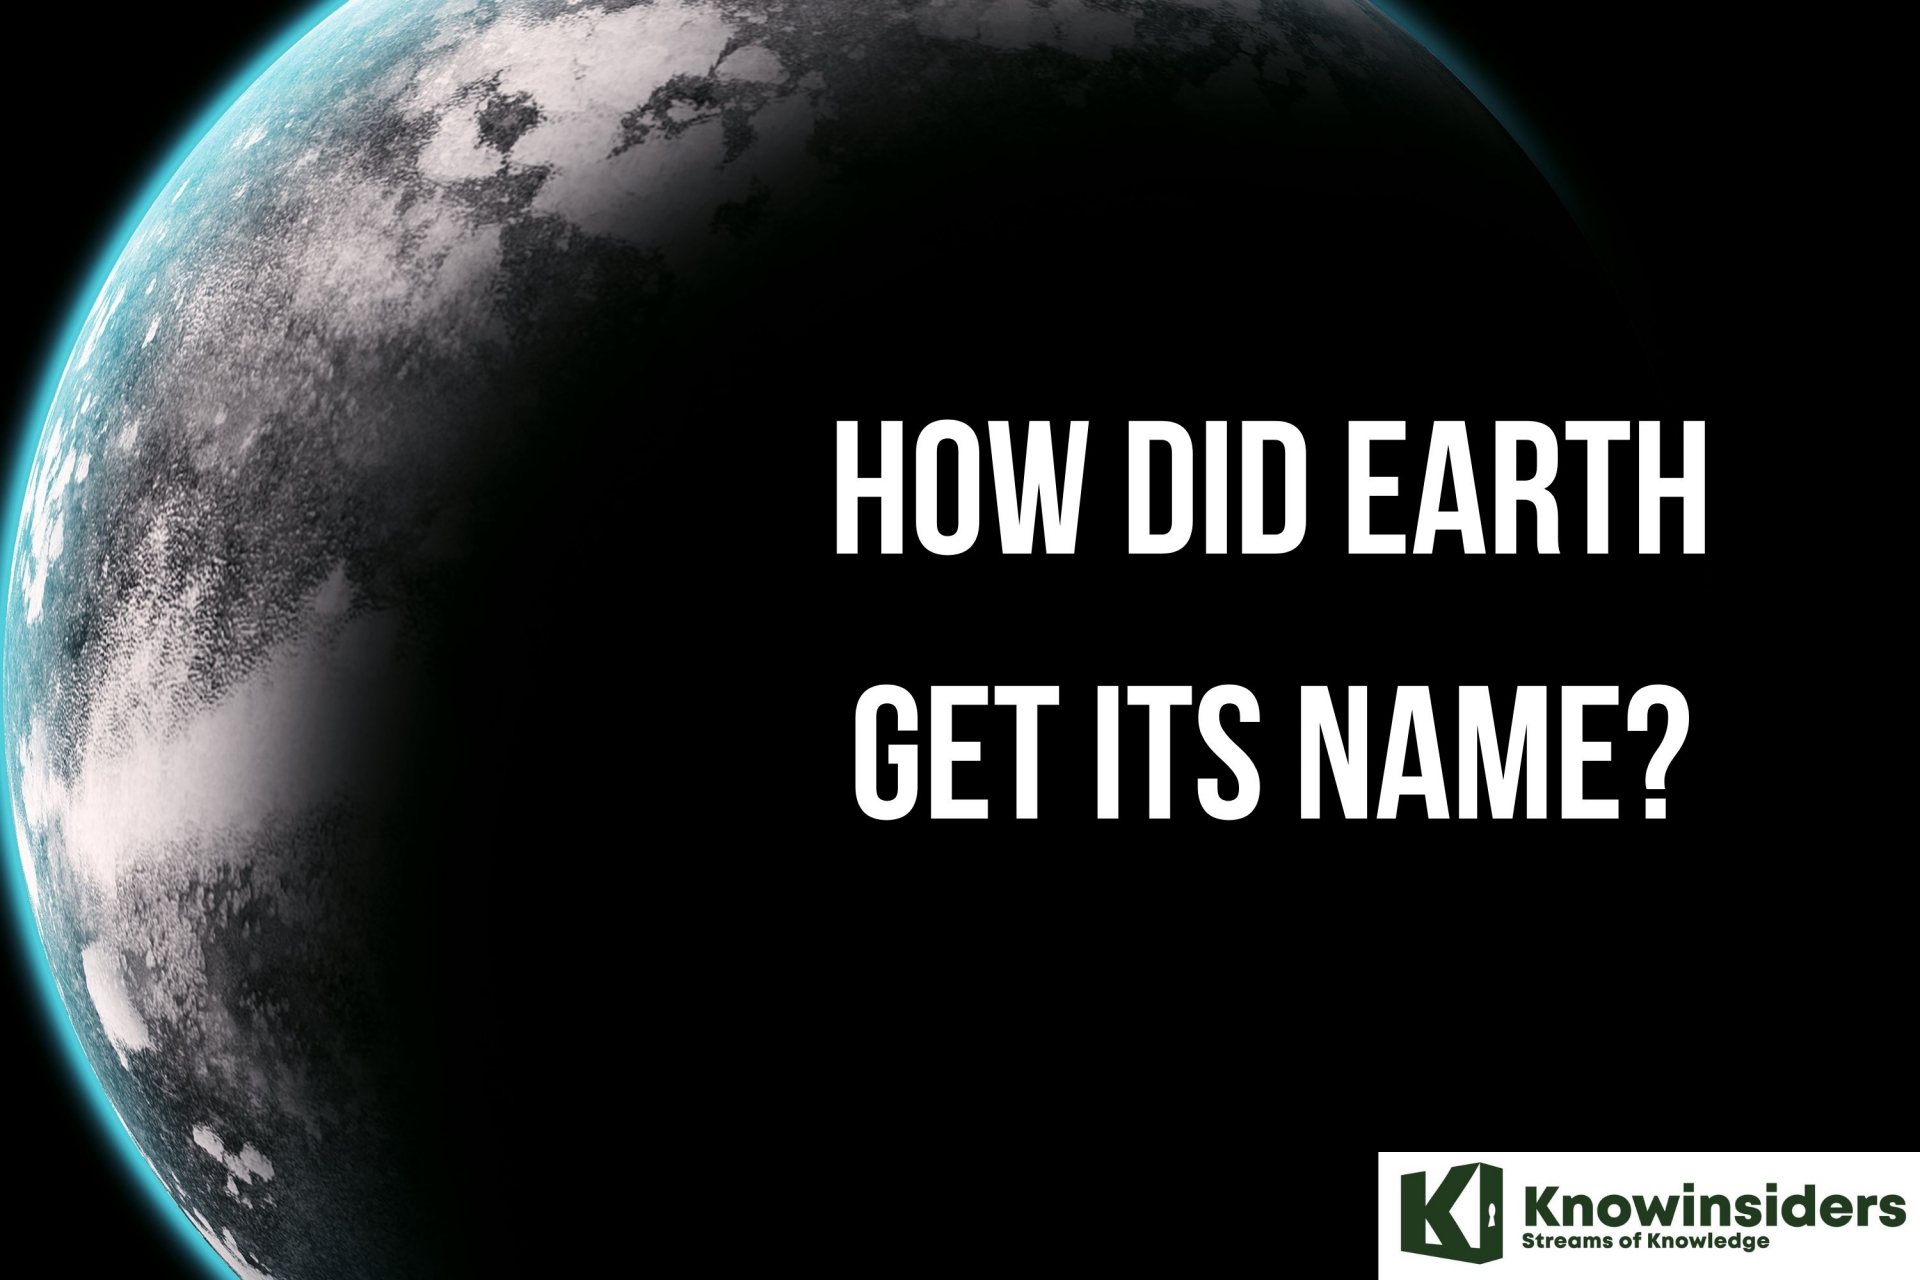 How Did Earth Get Its Name?